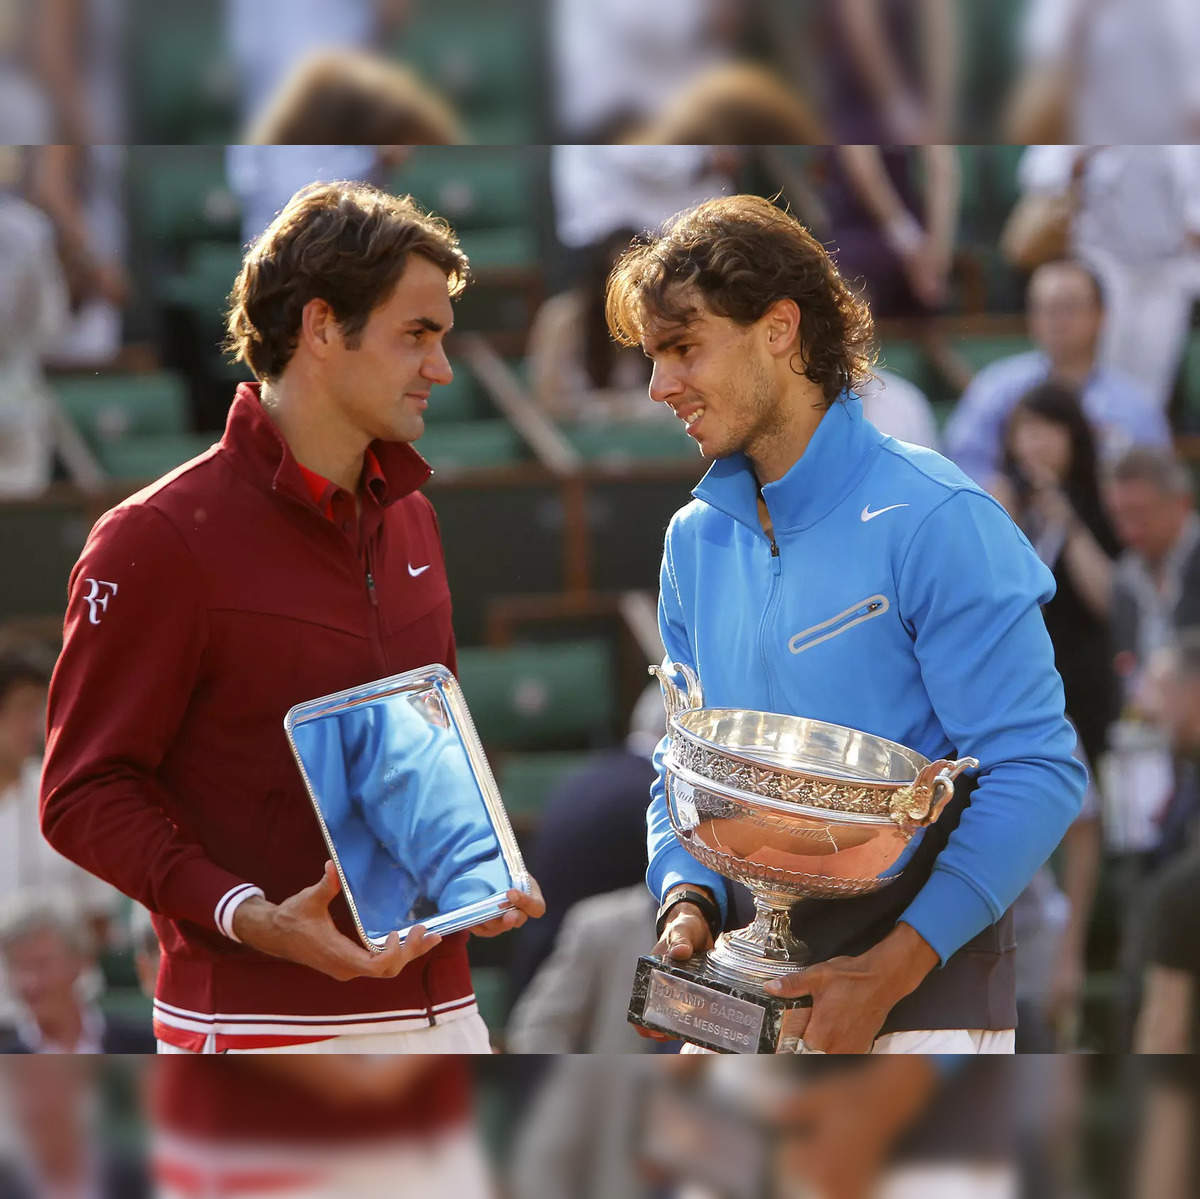 french open French Open starts May 28 Heres full schedule, timings, how to watch on TV, live stream